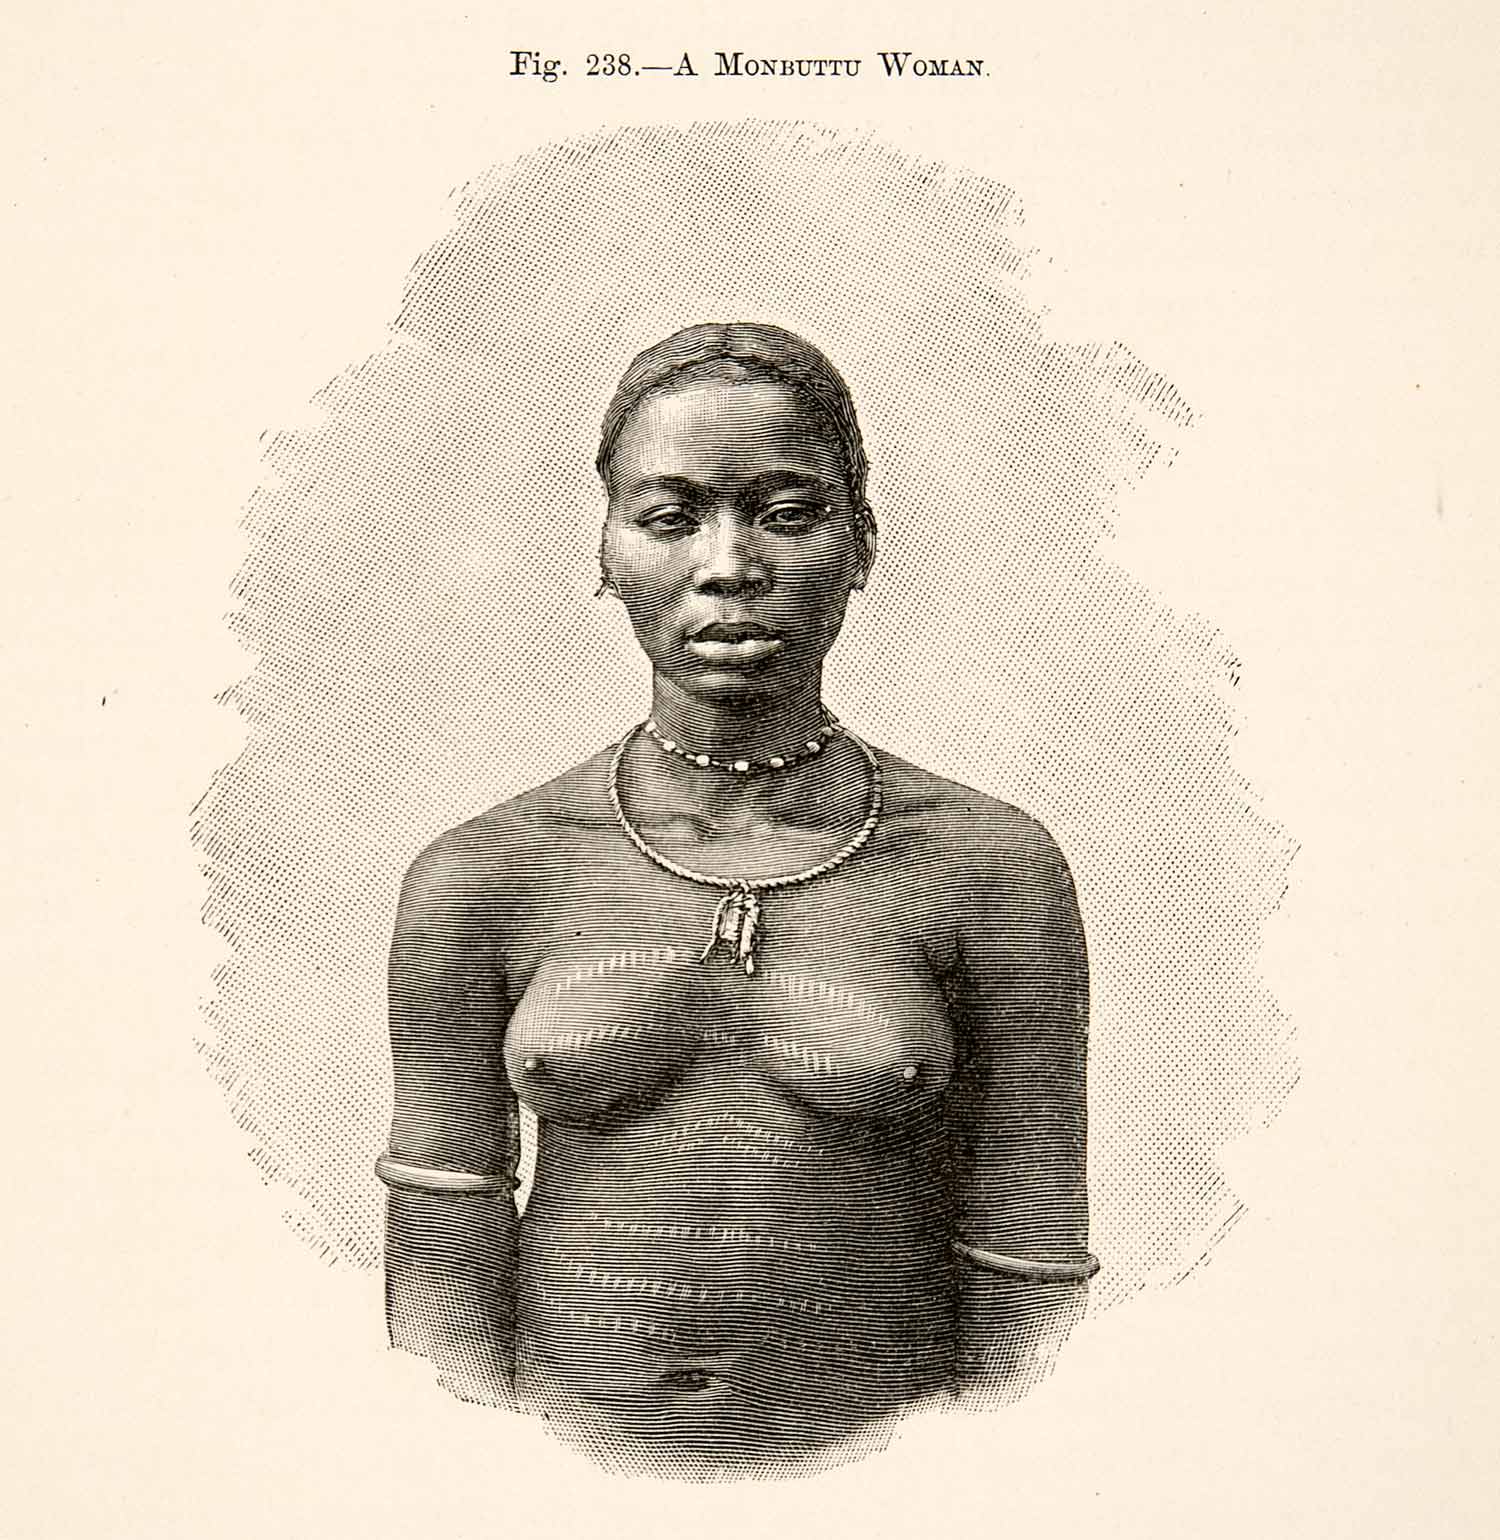 A young woman is traded into slavery